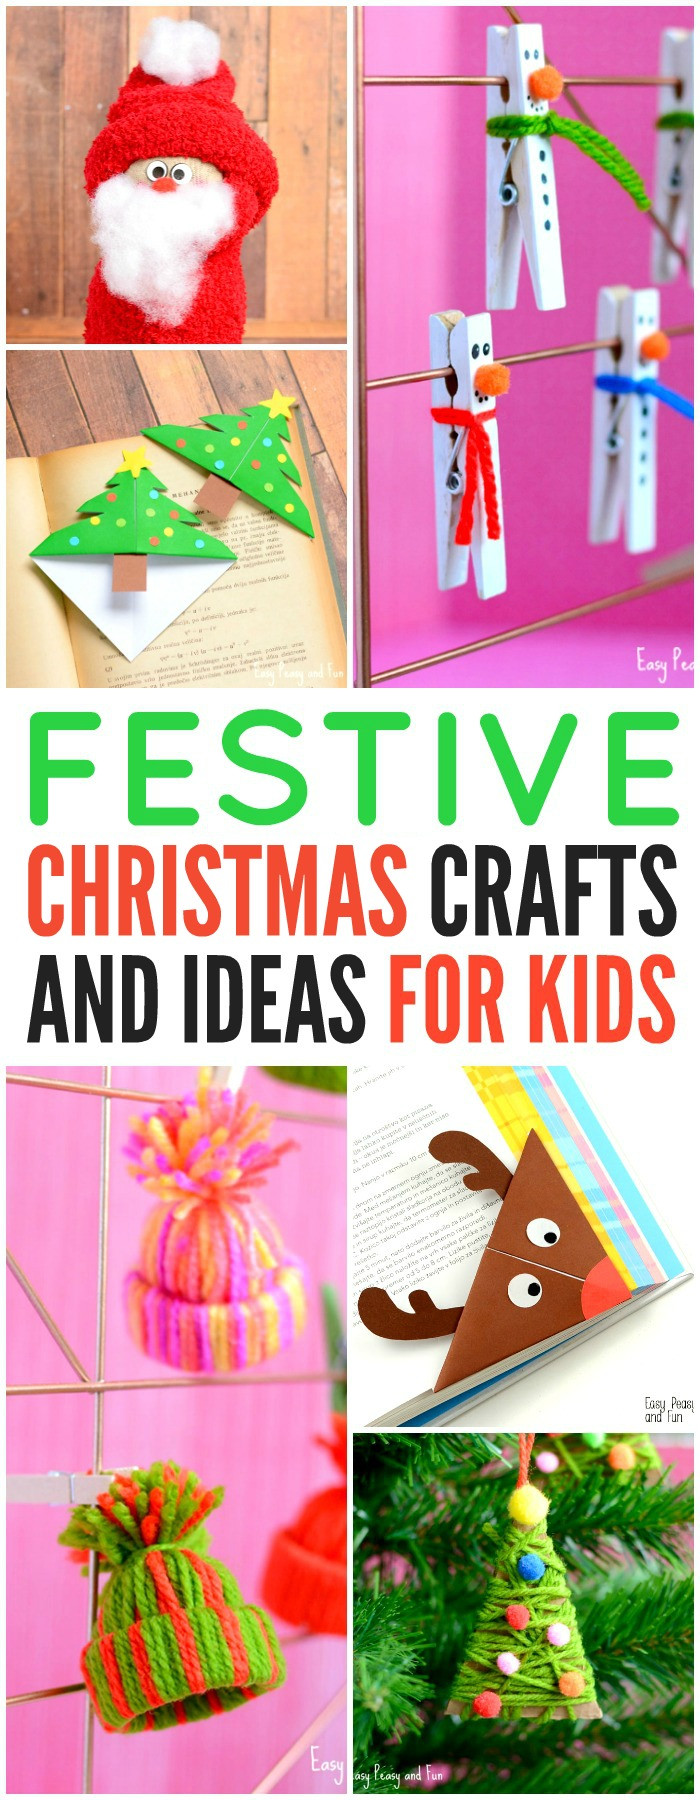 Childrens Christmas Craft Ideas
 Festive Christmas Crafts for Kids Tons of Art and